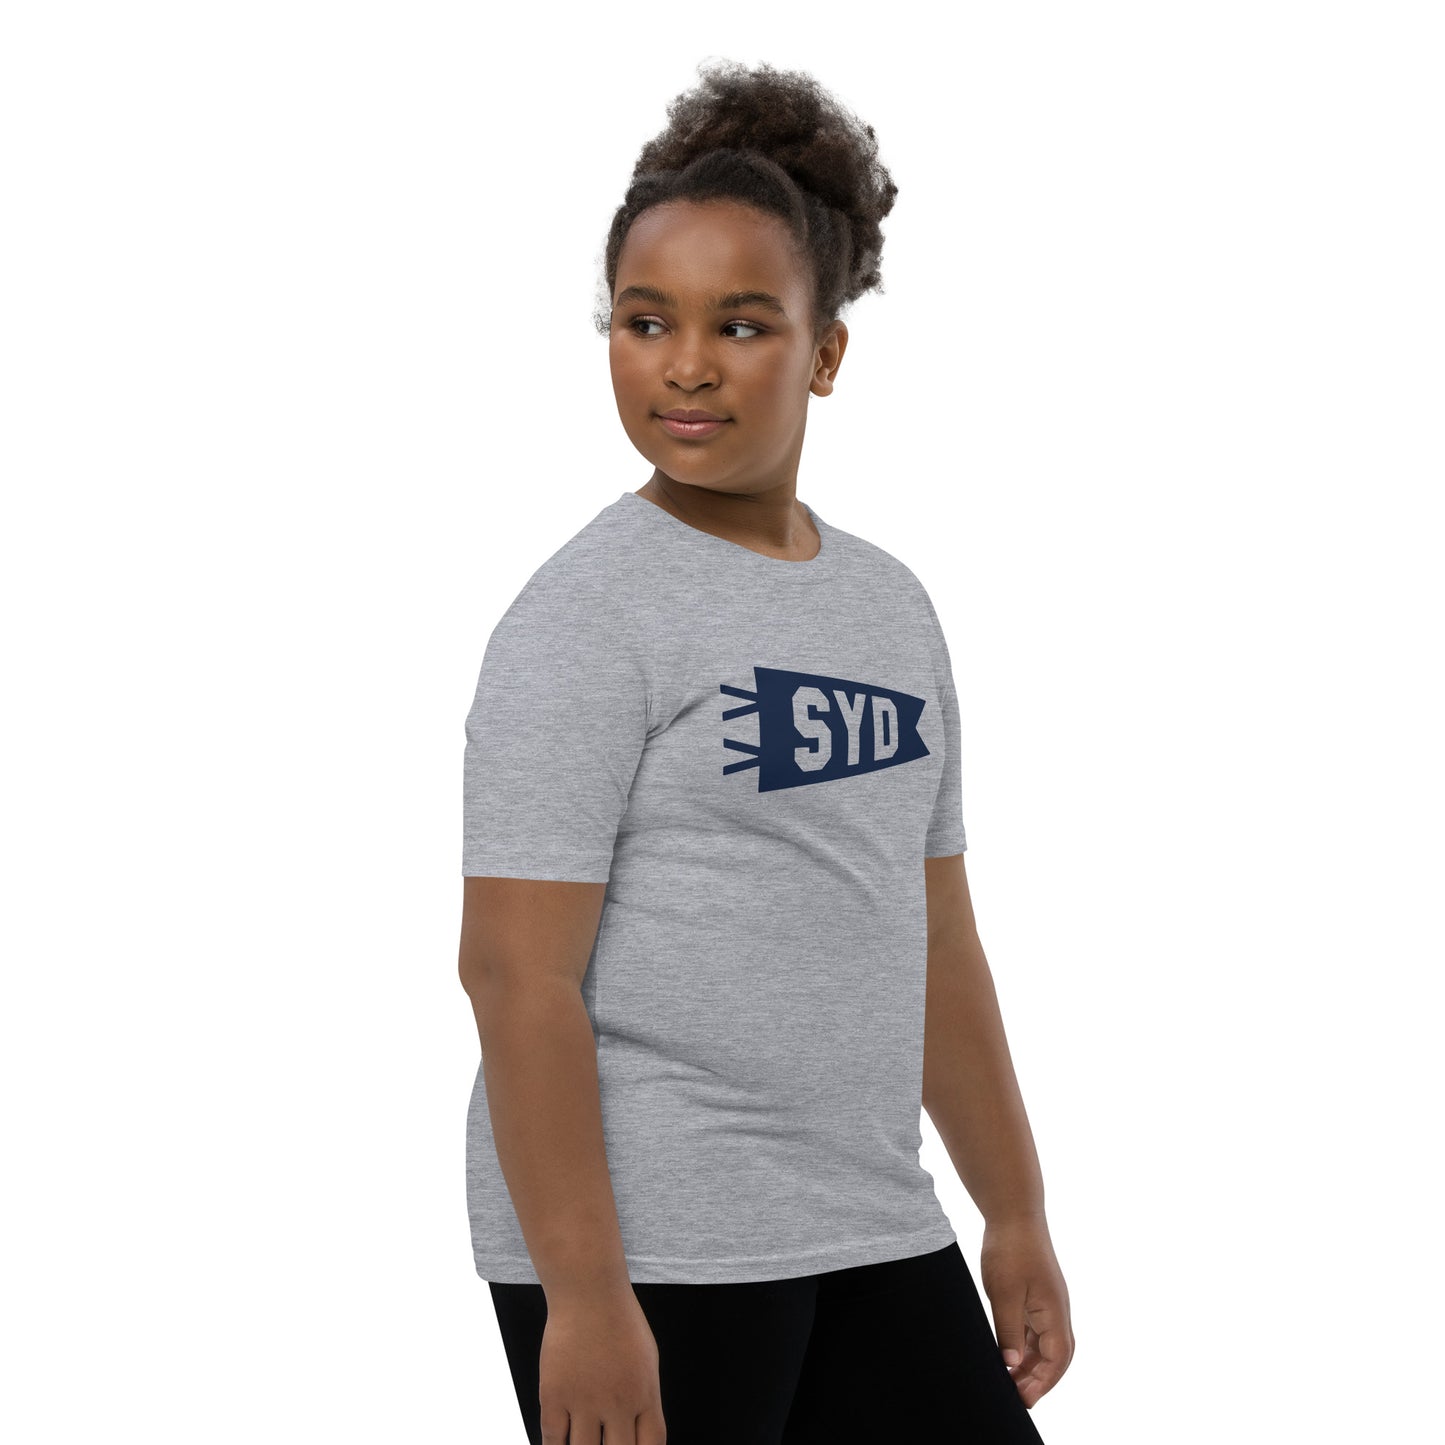 Kid's Airport Code Tee - Navy Blue Graphic • SYD Sydney • YHM Designs - Image 03